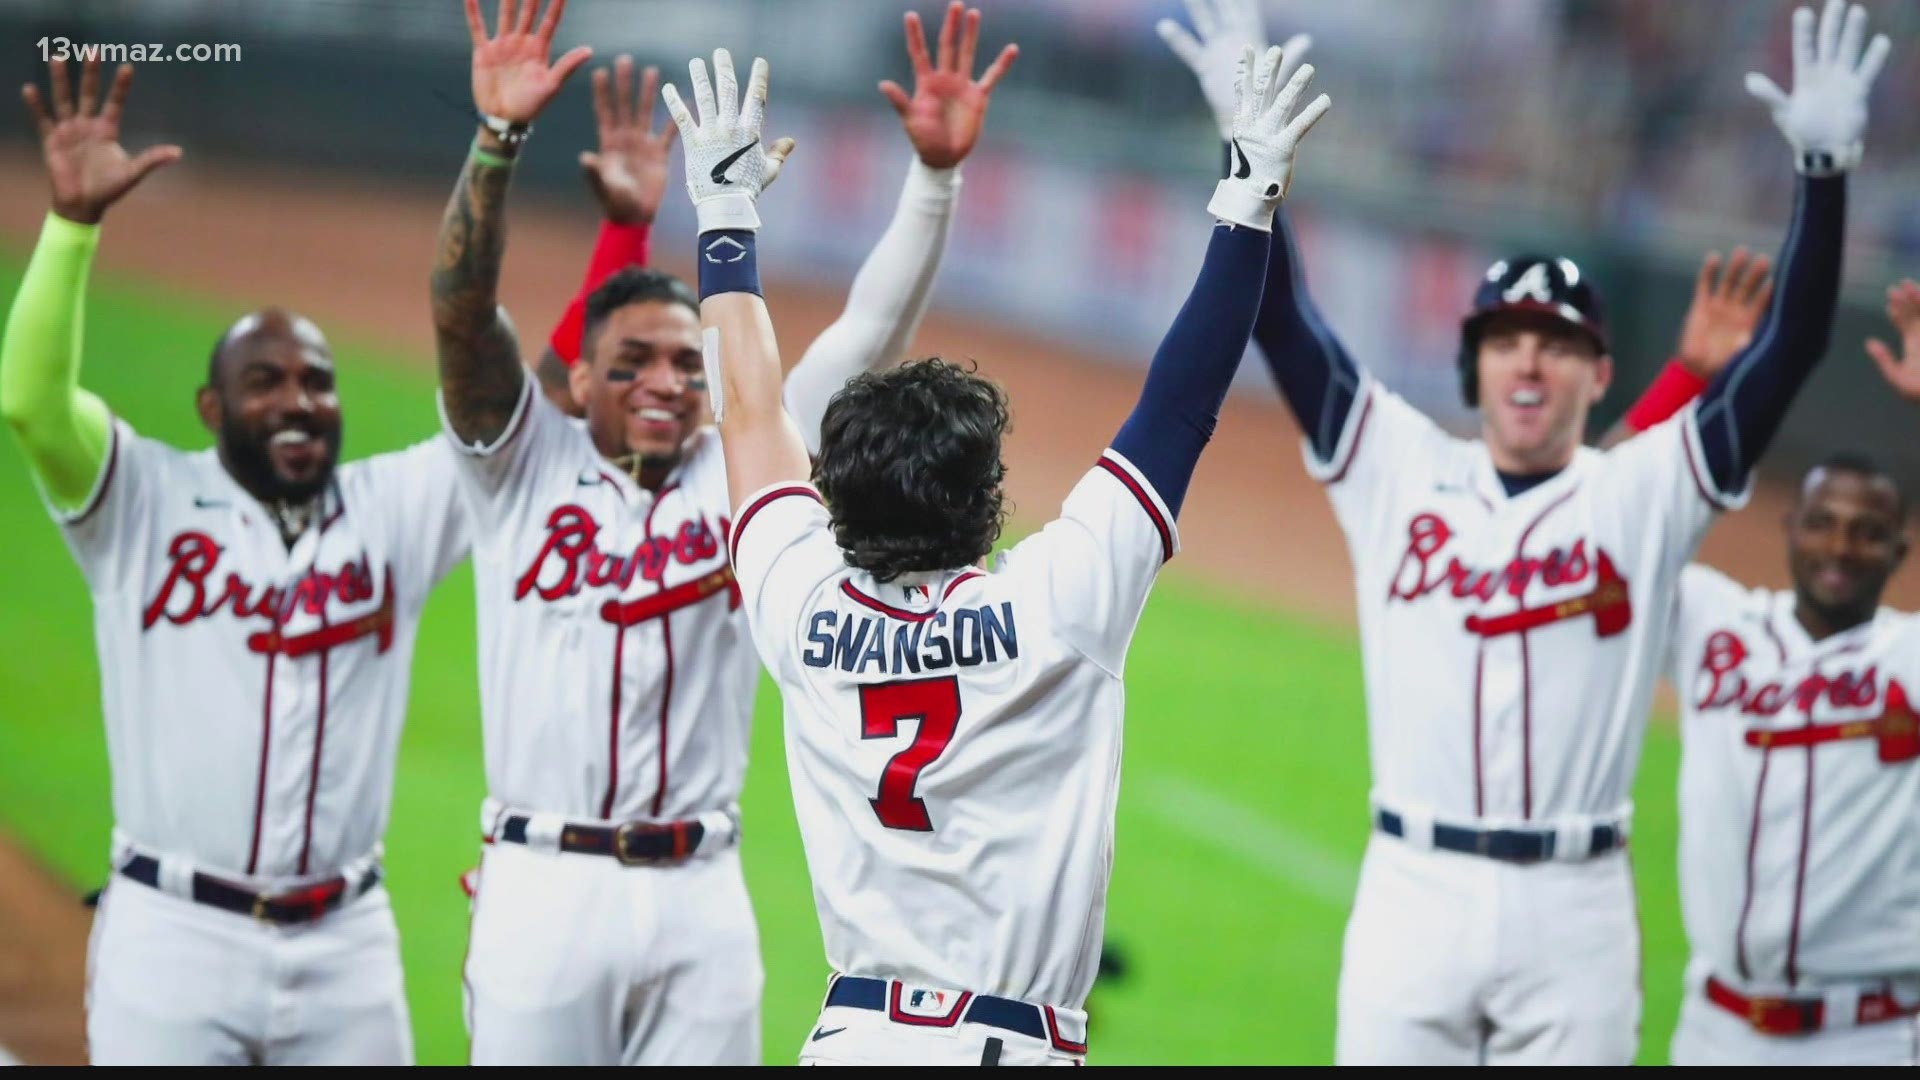 Do we think for the first time in nearly 20 years that the Braves will win a playoff series?